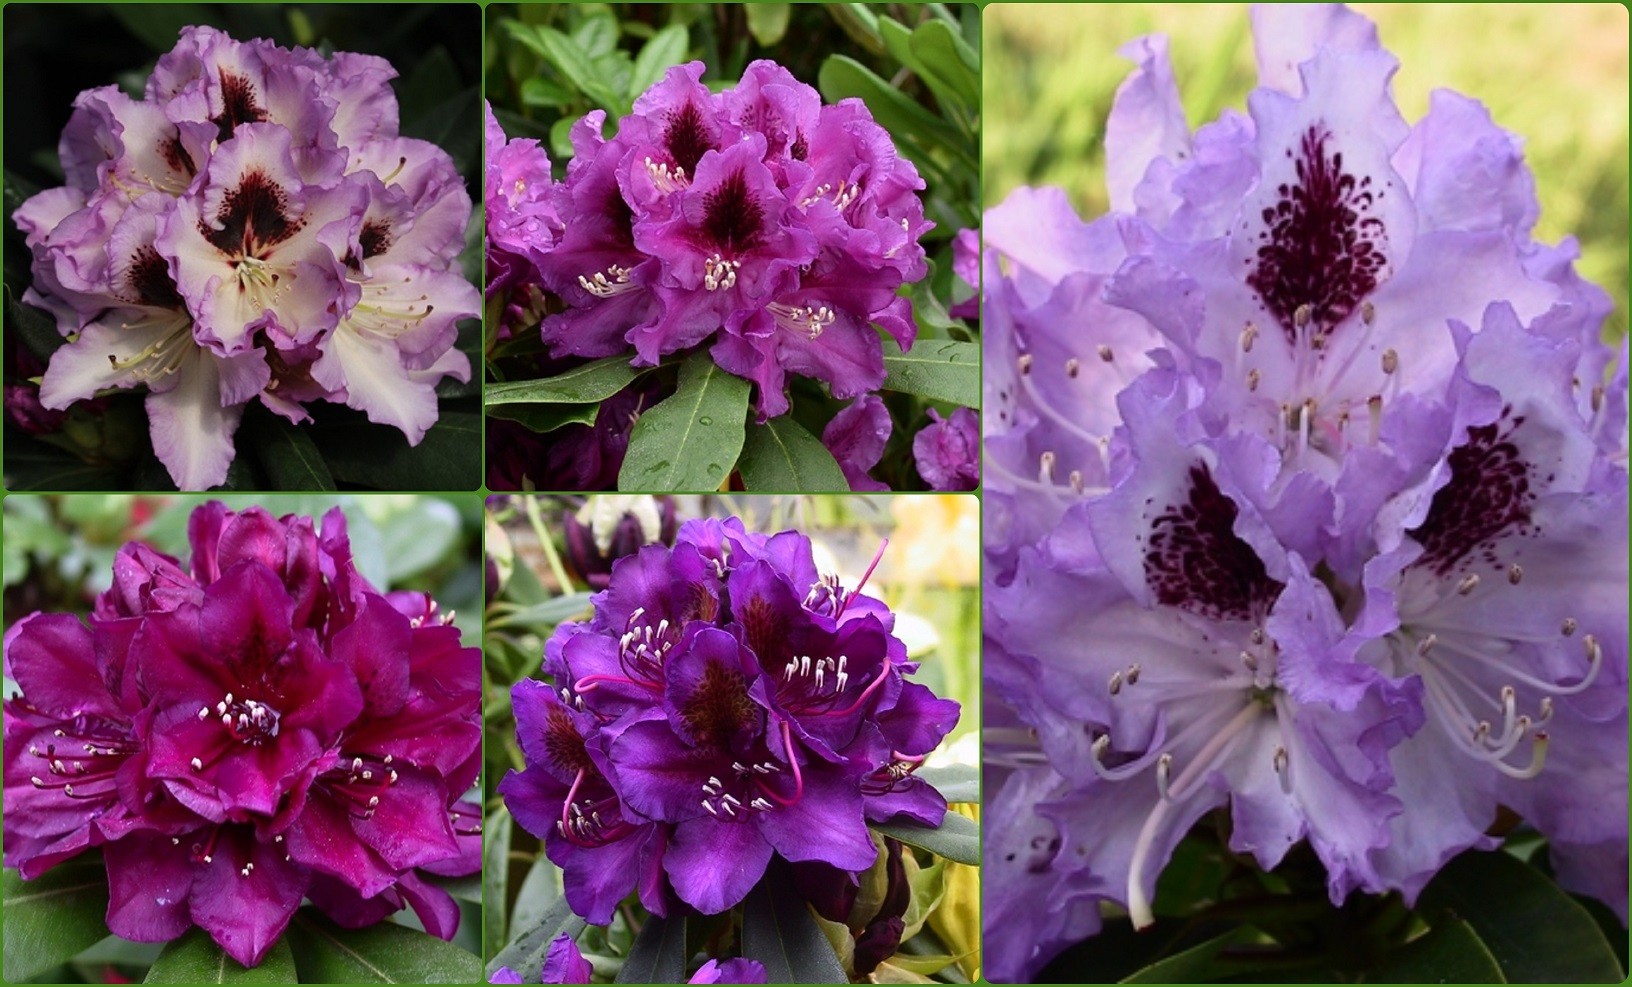 The collection of 5 purple Rhododendrons